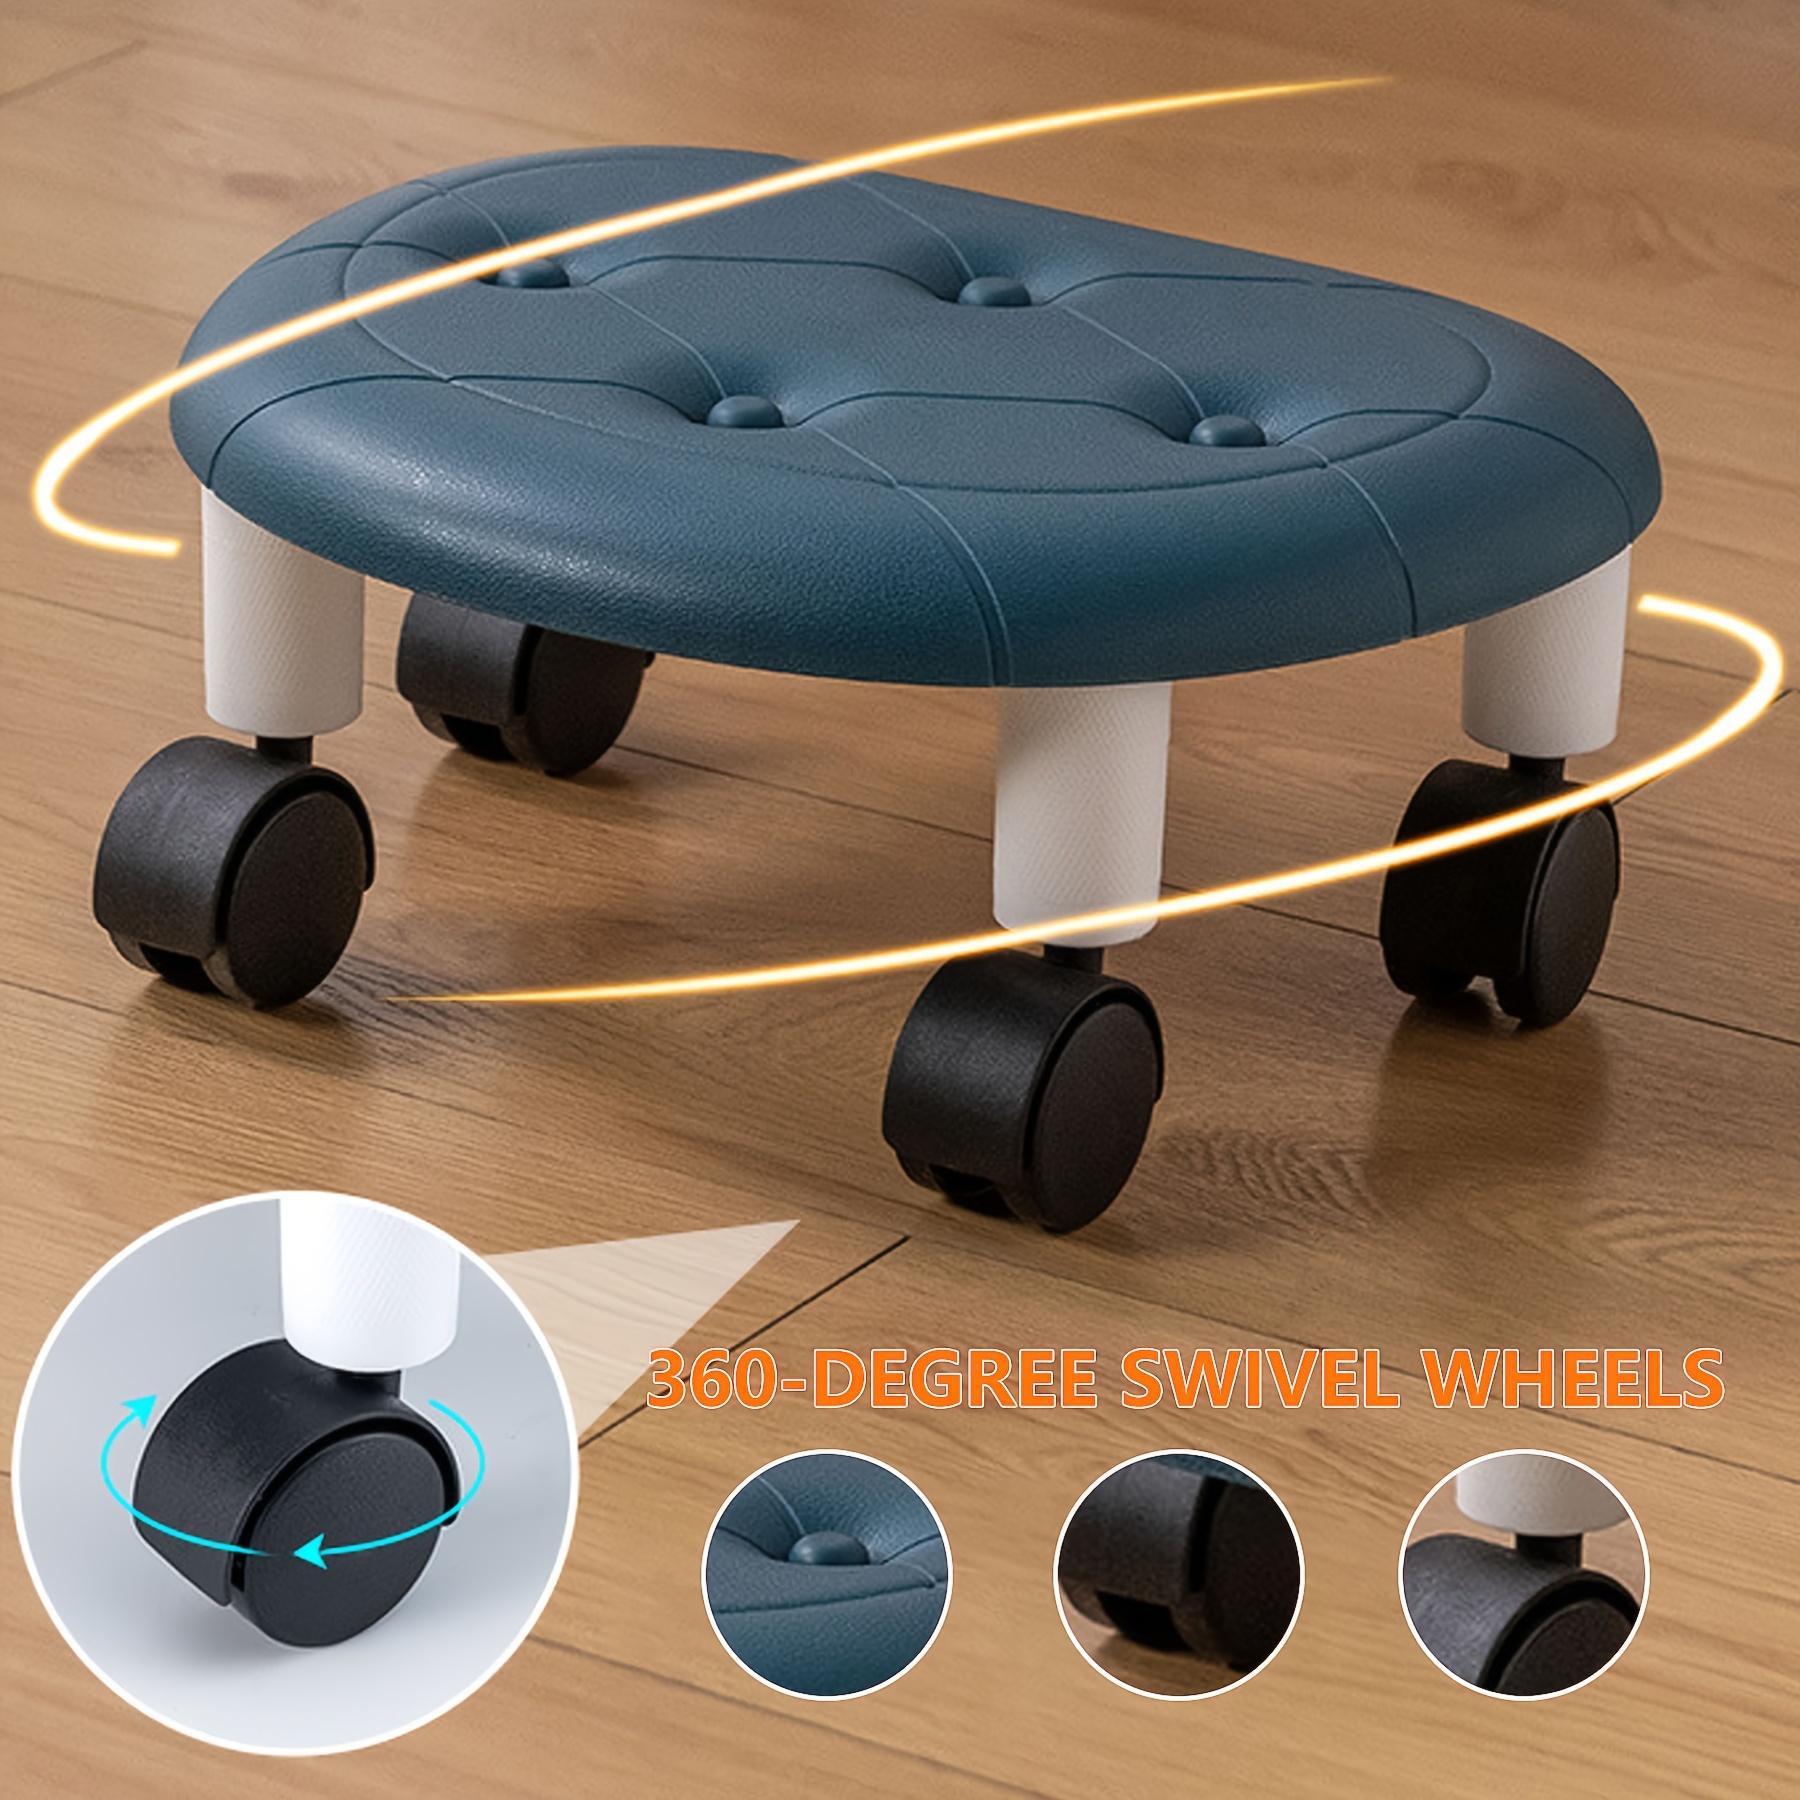  Fonowx Low Rolling Seat Footstool Portable Shoes